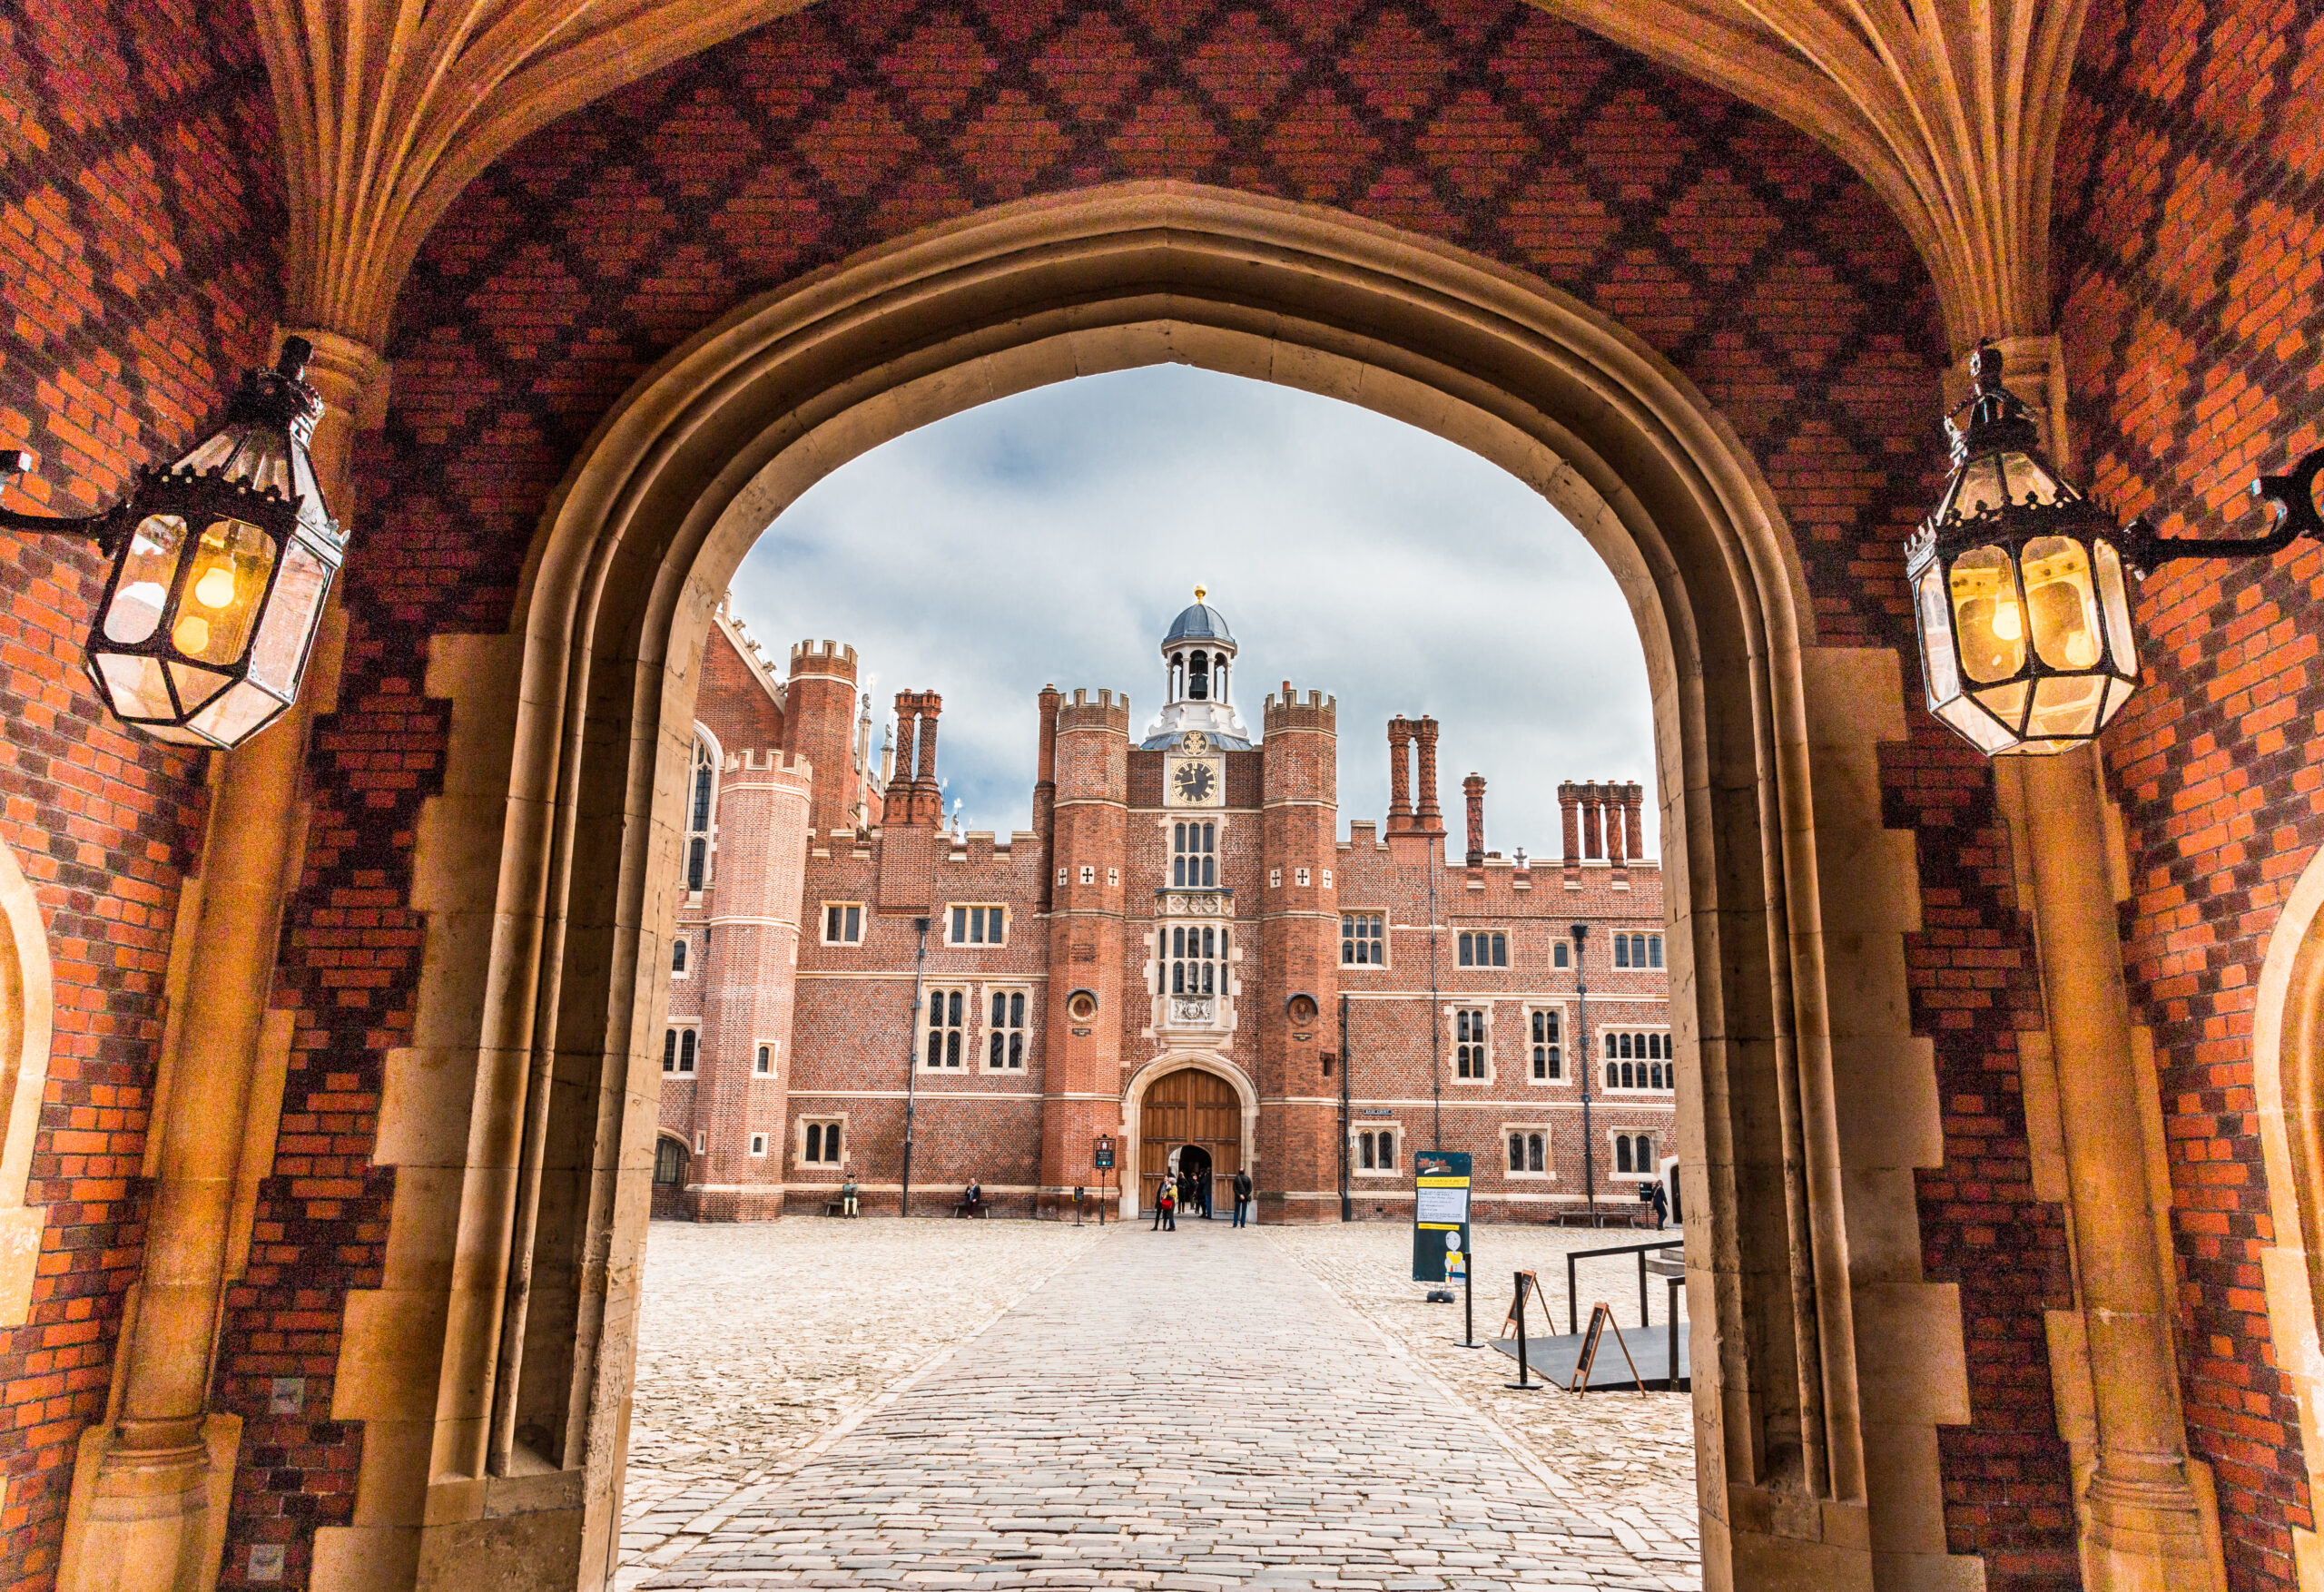 London, UK - 26 October, 2015: exterior image of Hampton Court Palace on a crisp autumn day. Hampton Court Palace is a royal palace in the London Borough of Richmond upon Thames, Greater London, in the historic county of Middlesex, and within the postal town East Molesey, Surrey. It has not been inhabited by the British Royal Family since the 18th century. The palace is 11.7 miles (18.8 kilometres) south west of Charing Cross and upstream of central London on the River Thames. Redevelopment began to be carried out in 1515 for Cardinal Thomas Wolsey, a favourite of King Henry VIII. In 1529, as Wolsey fell from favour, the King seized the palace for himself and later enlarged it. Along with St. James's Palace, it is one of only two surviving palaces out of the many owned by King Henry VIII. Horizontal colour image.